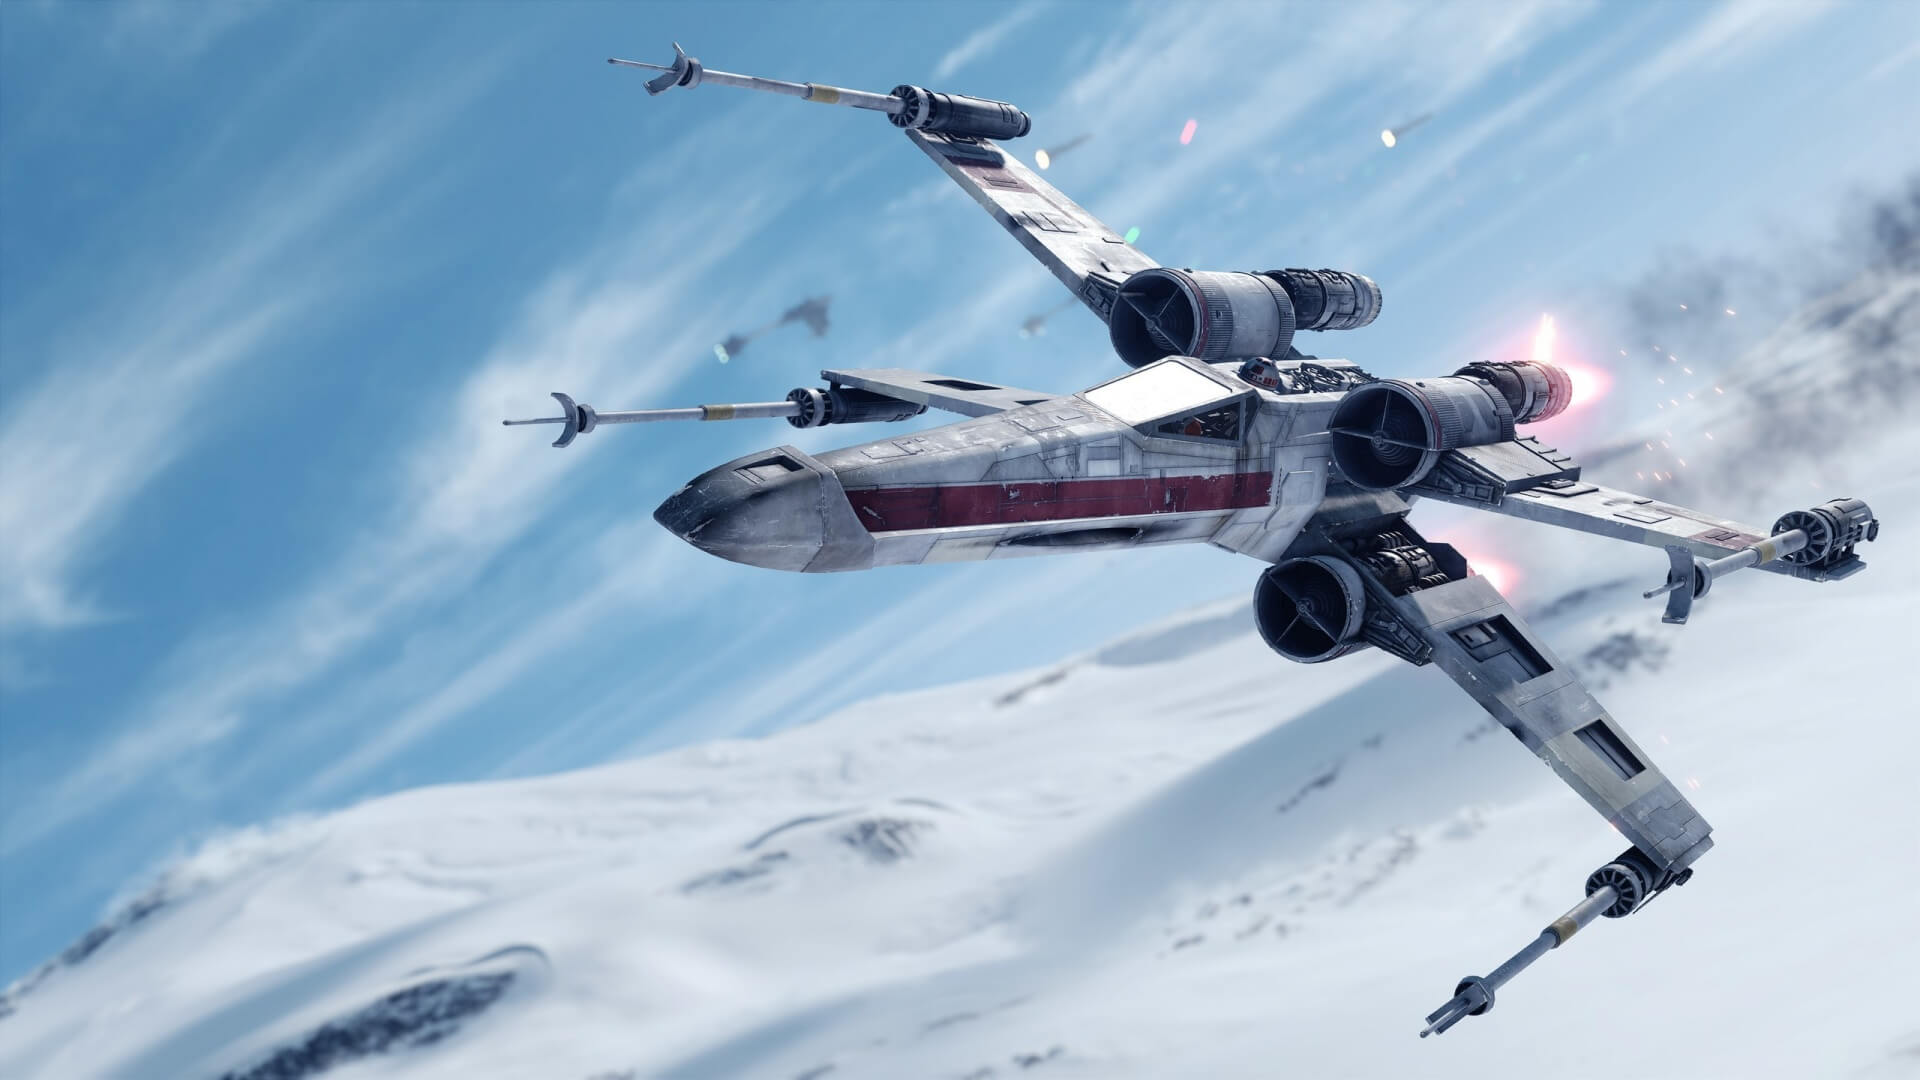 Star Wars Battlefront Free DLC This Month Includes New Map & Outfits